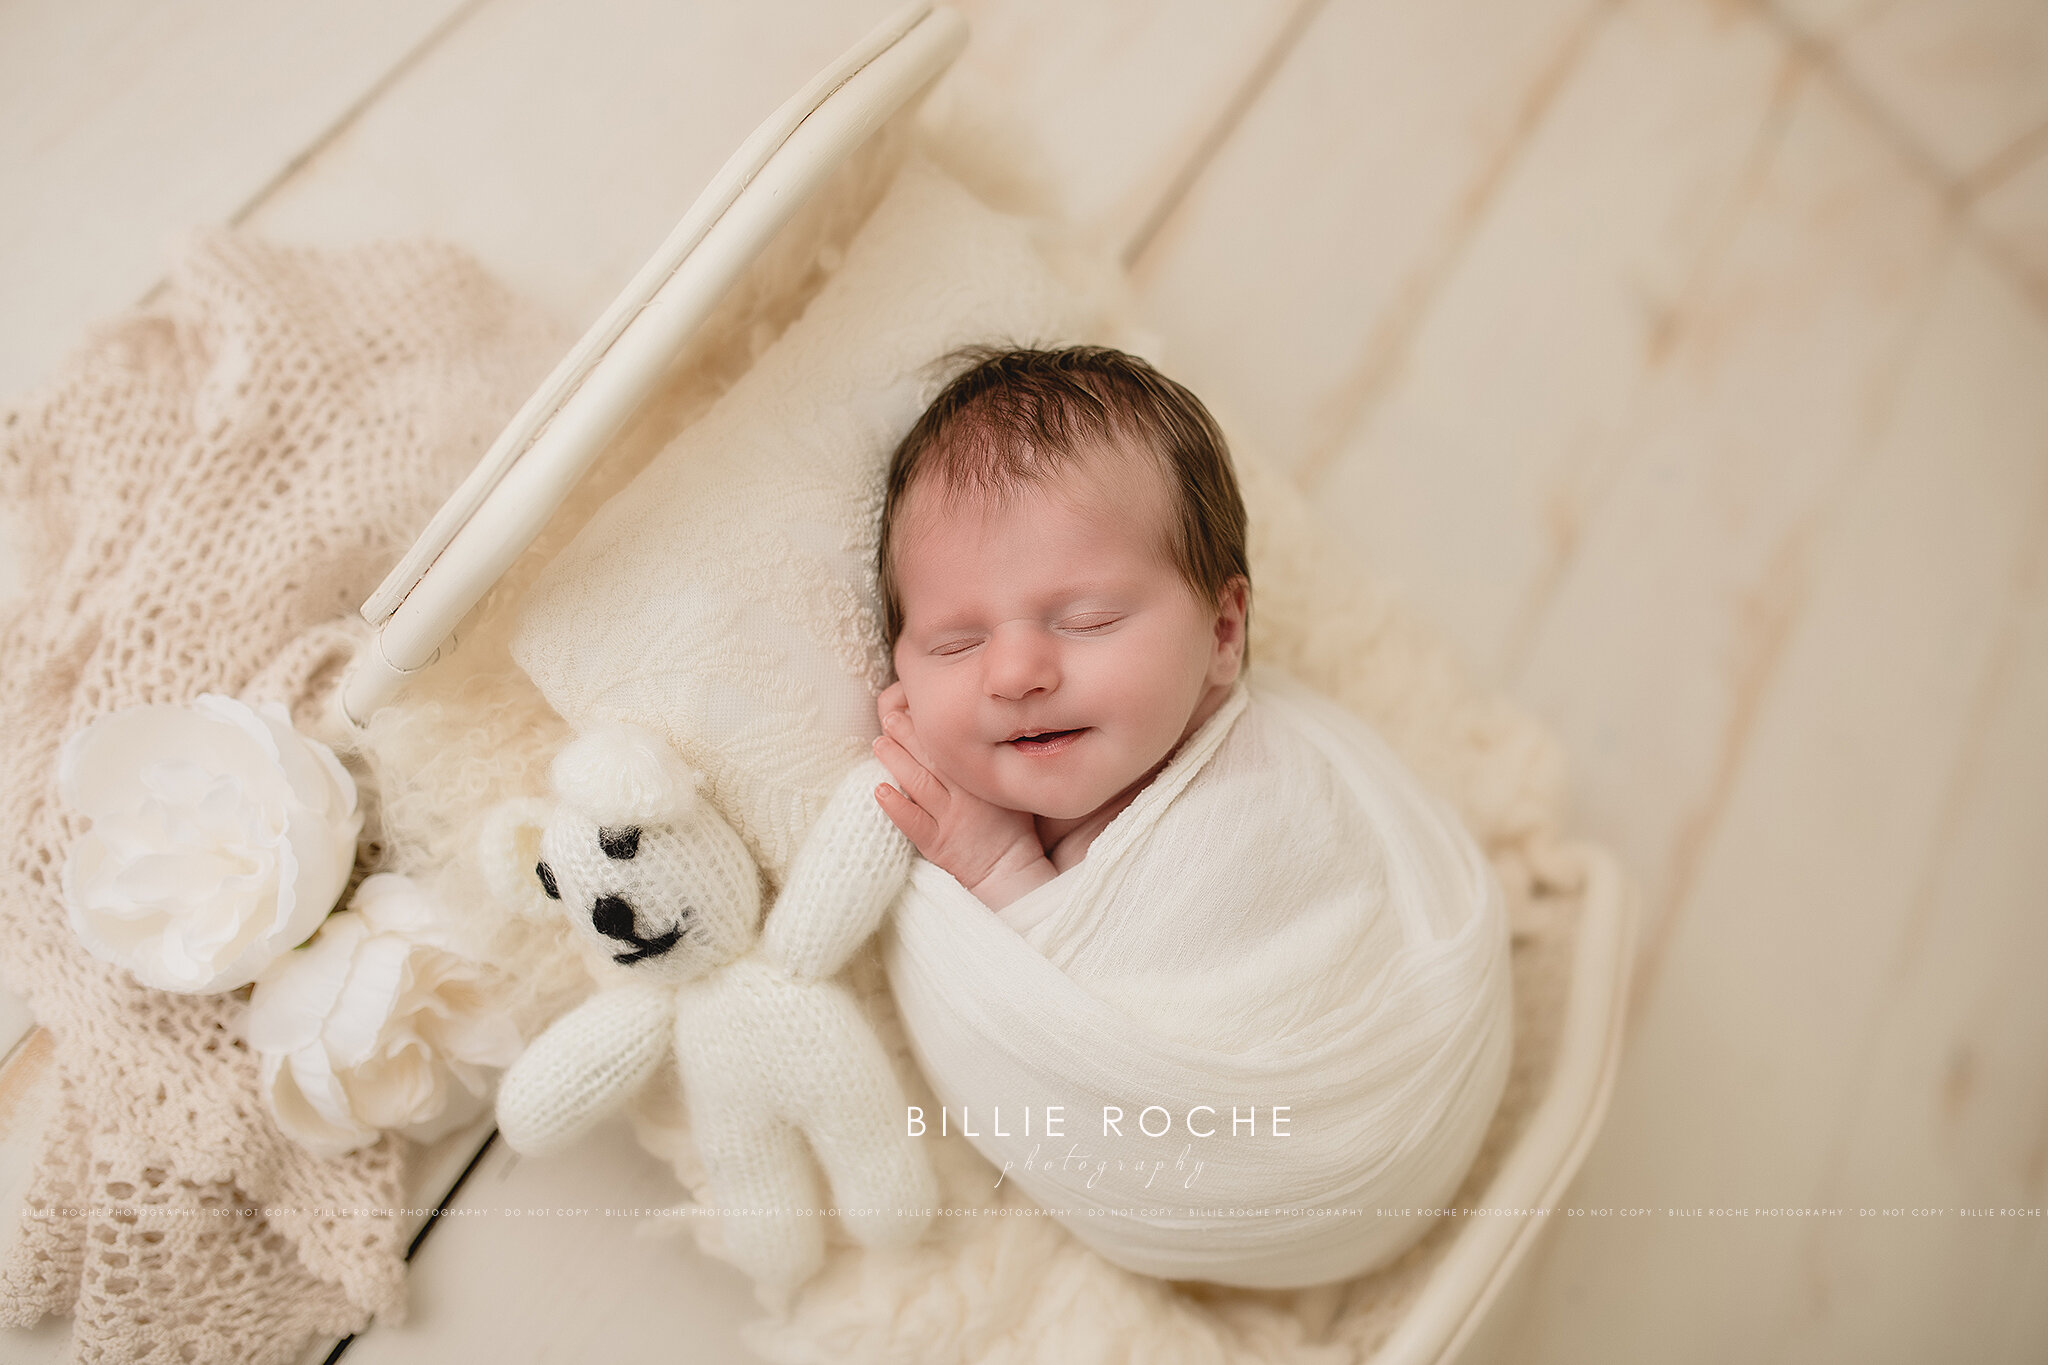  Billie Roche Photography is an award winning photographer specializing in newborn, maternity, baby and family photography in Houston, Texas. Serving surrounding areas like Fulshear, Katy, Richmond, Sugar Land, Missouri, Rosenberg, Cypress, Spring,Ri